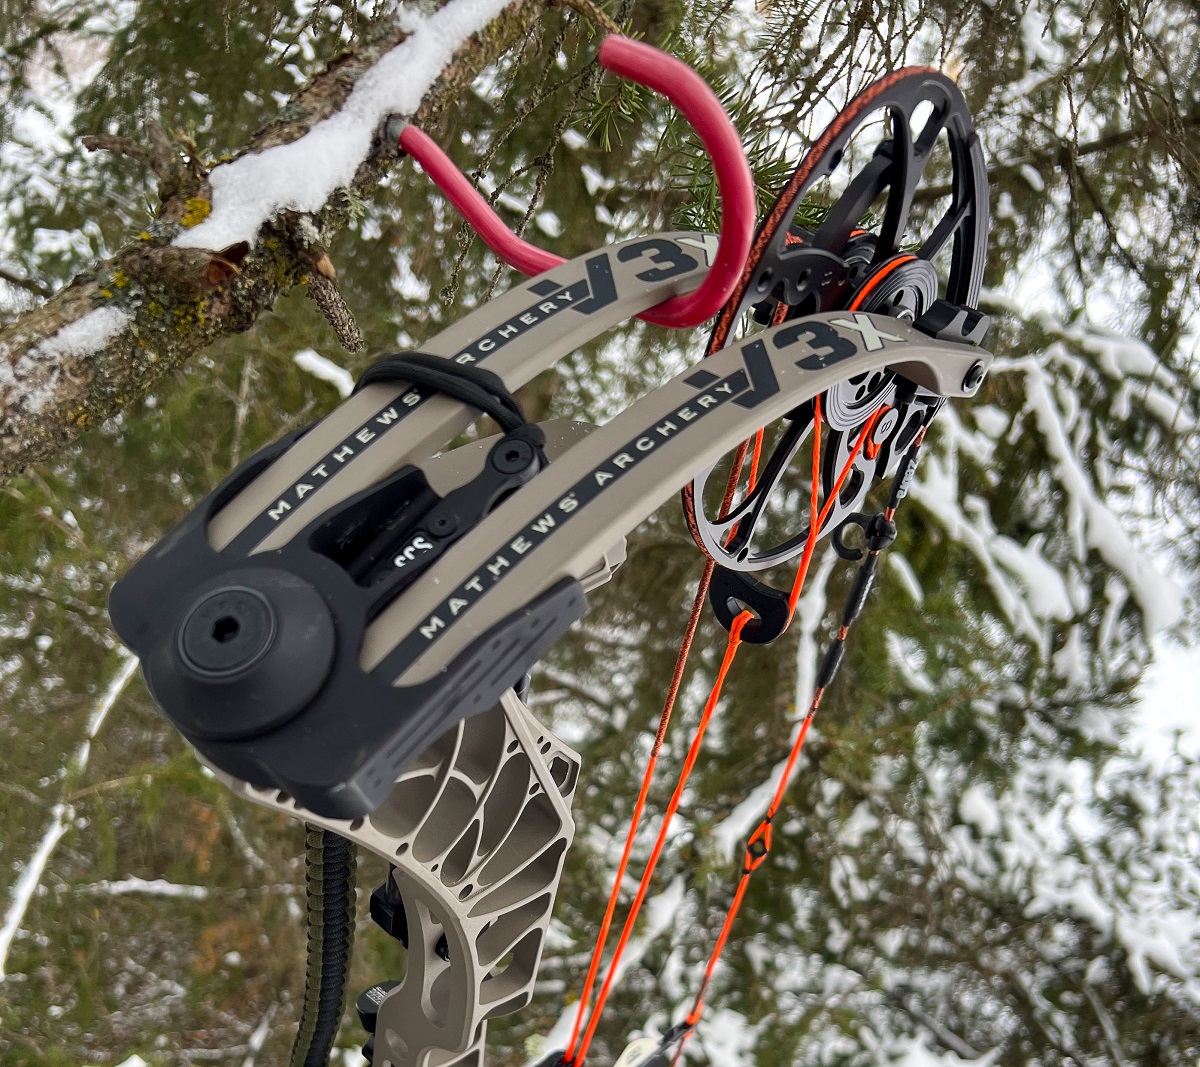 Treeestand pic Mathews V3X Review